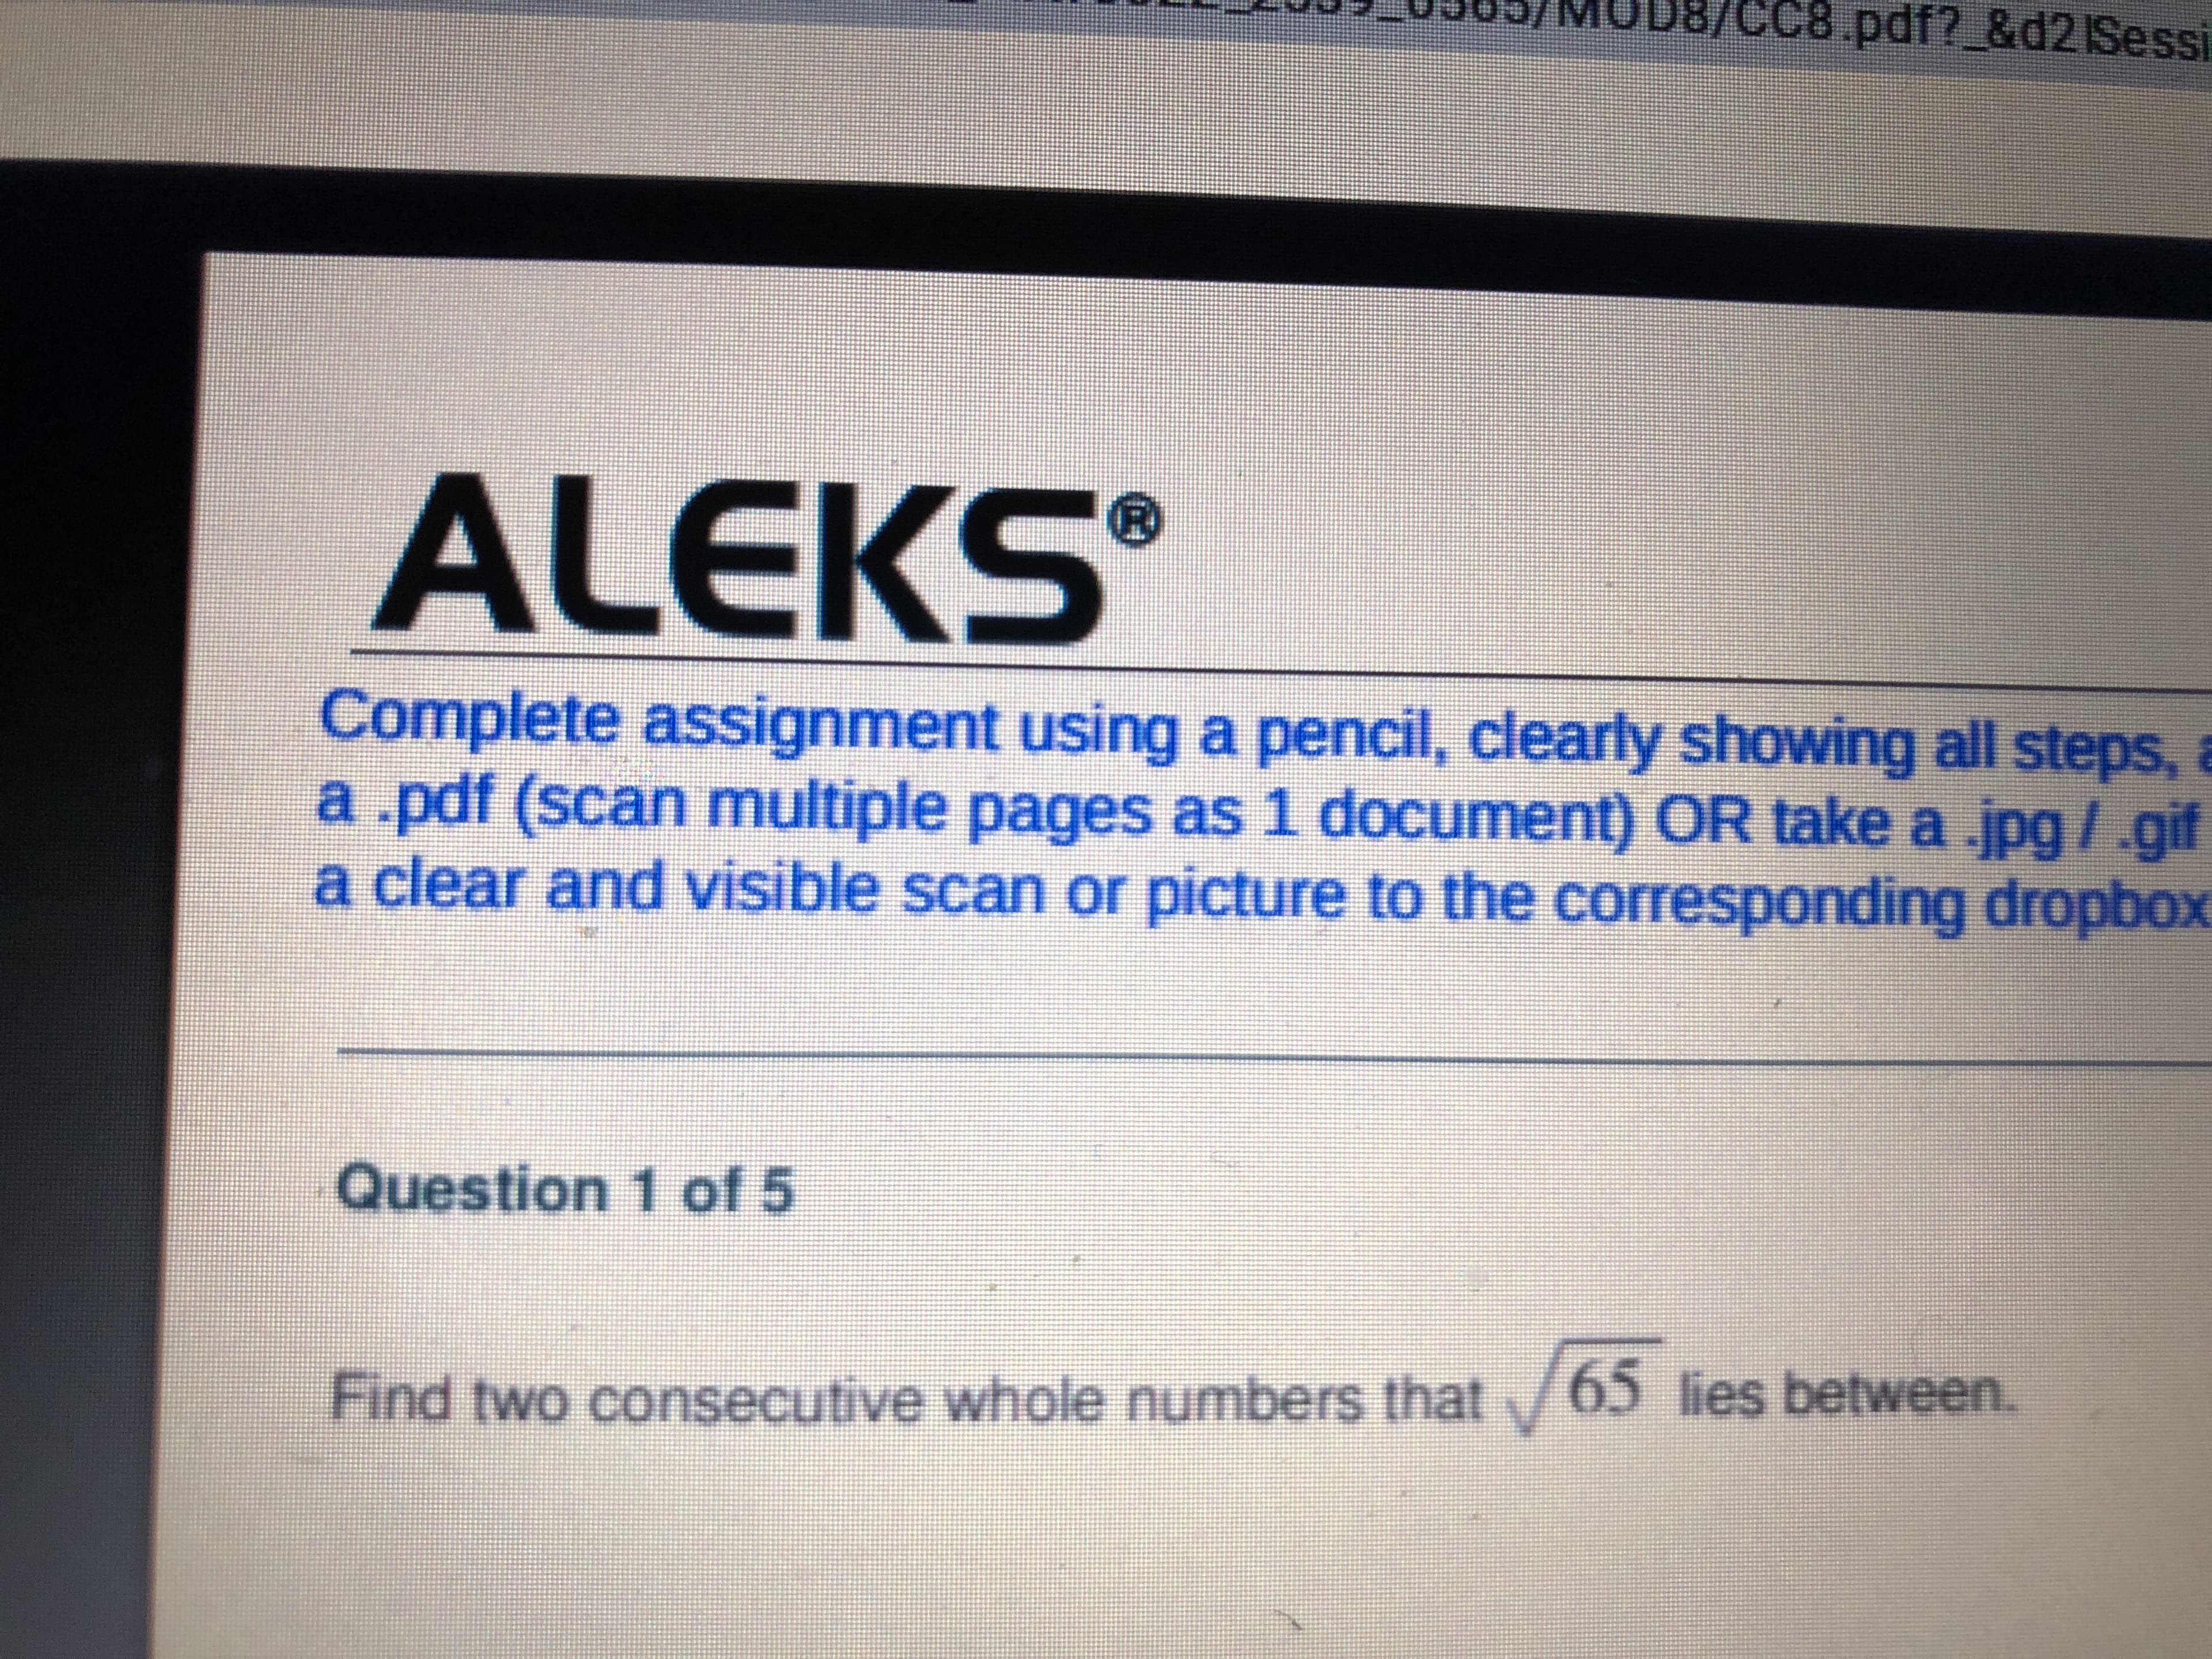 CC8 pdf? &d2 Sessi
ALEKS
Complete assignment using a pencil, clearly showing all steps,
a.pdf (scan multiple pages as 1 document) OR take a .jpg/.gif
a clear and visible scan or picture to the corresponding dropbox
Question 1 of 5
Find two consecutive whole numbers that/65 lies between.
